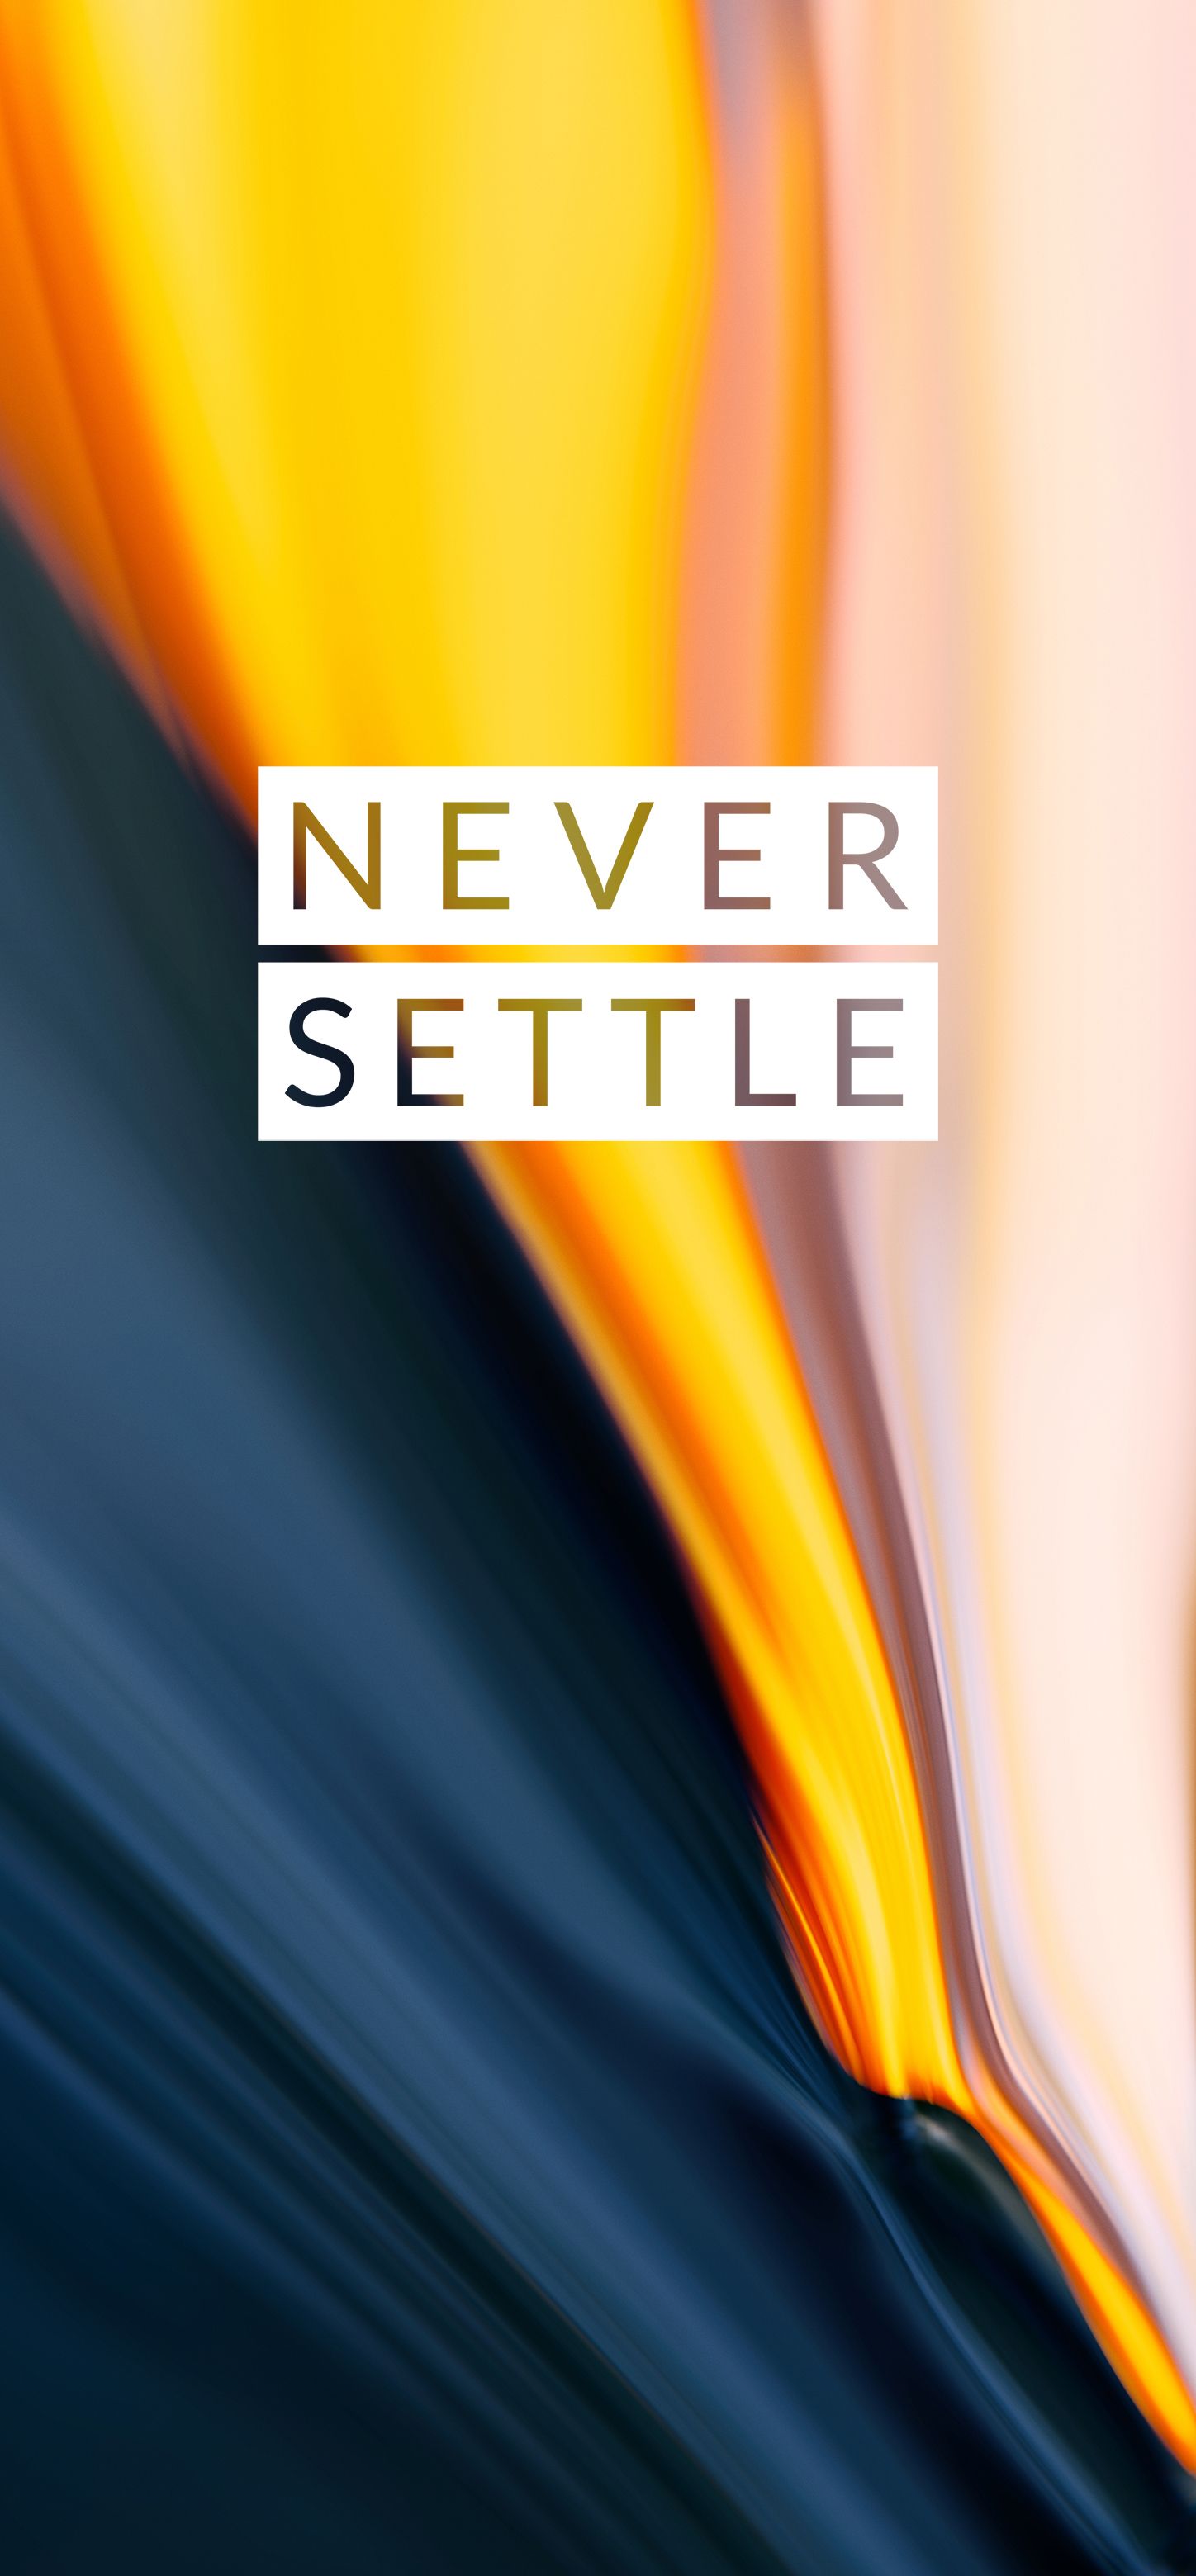 One Plus Never Settle Wallpapers